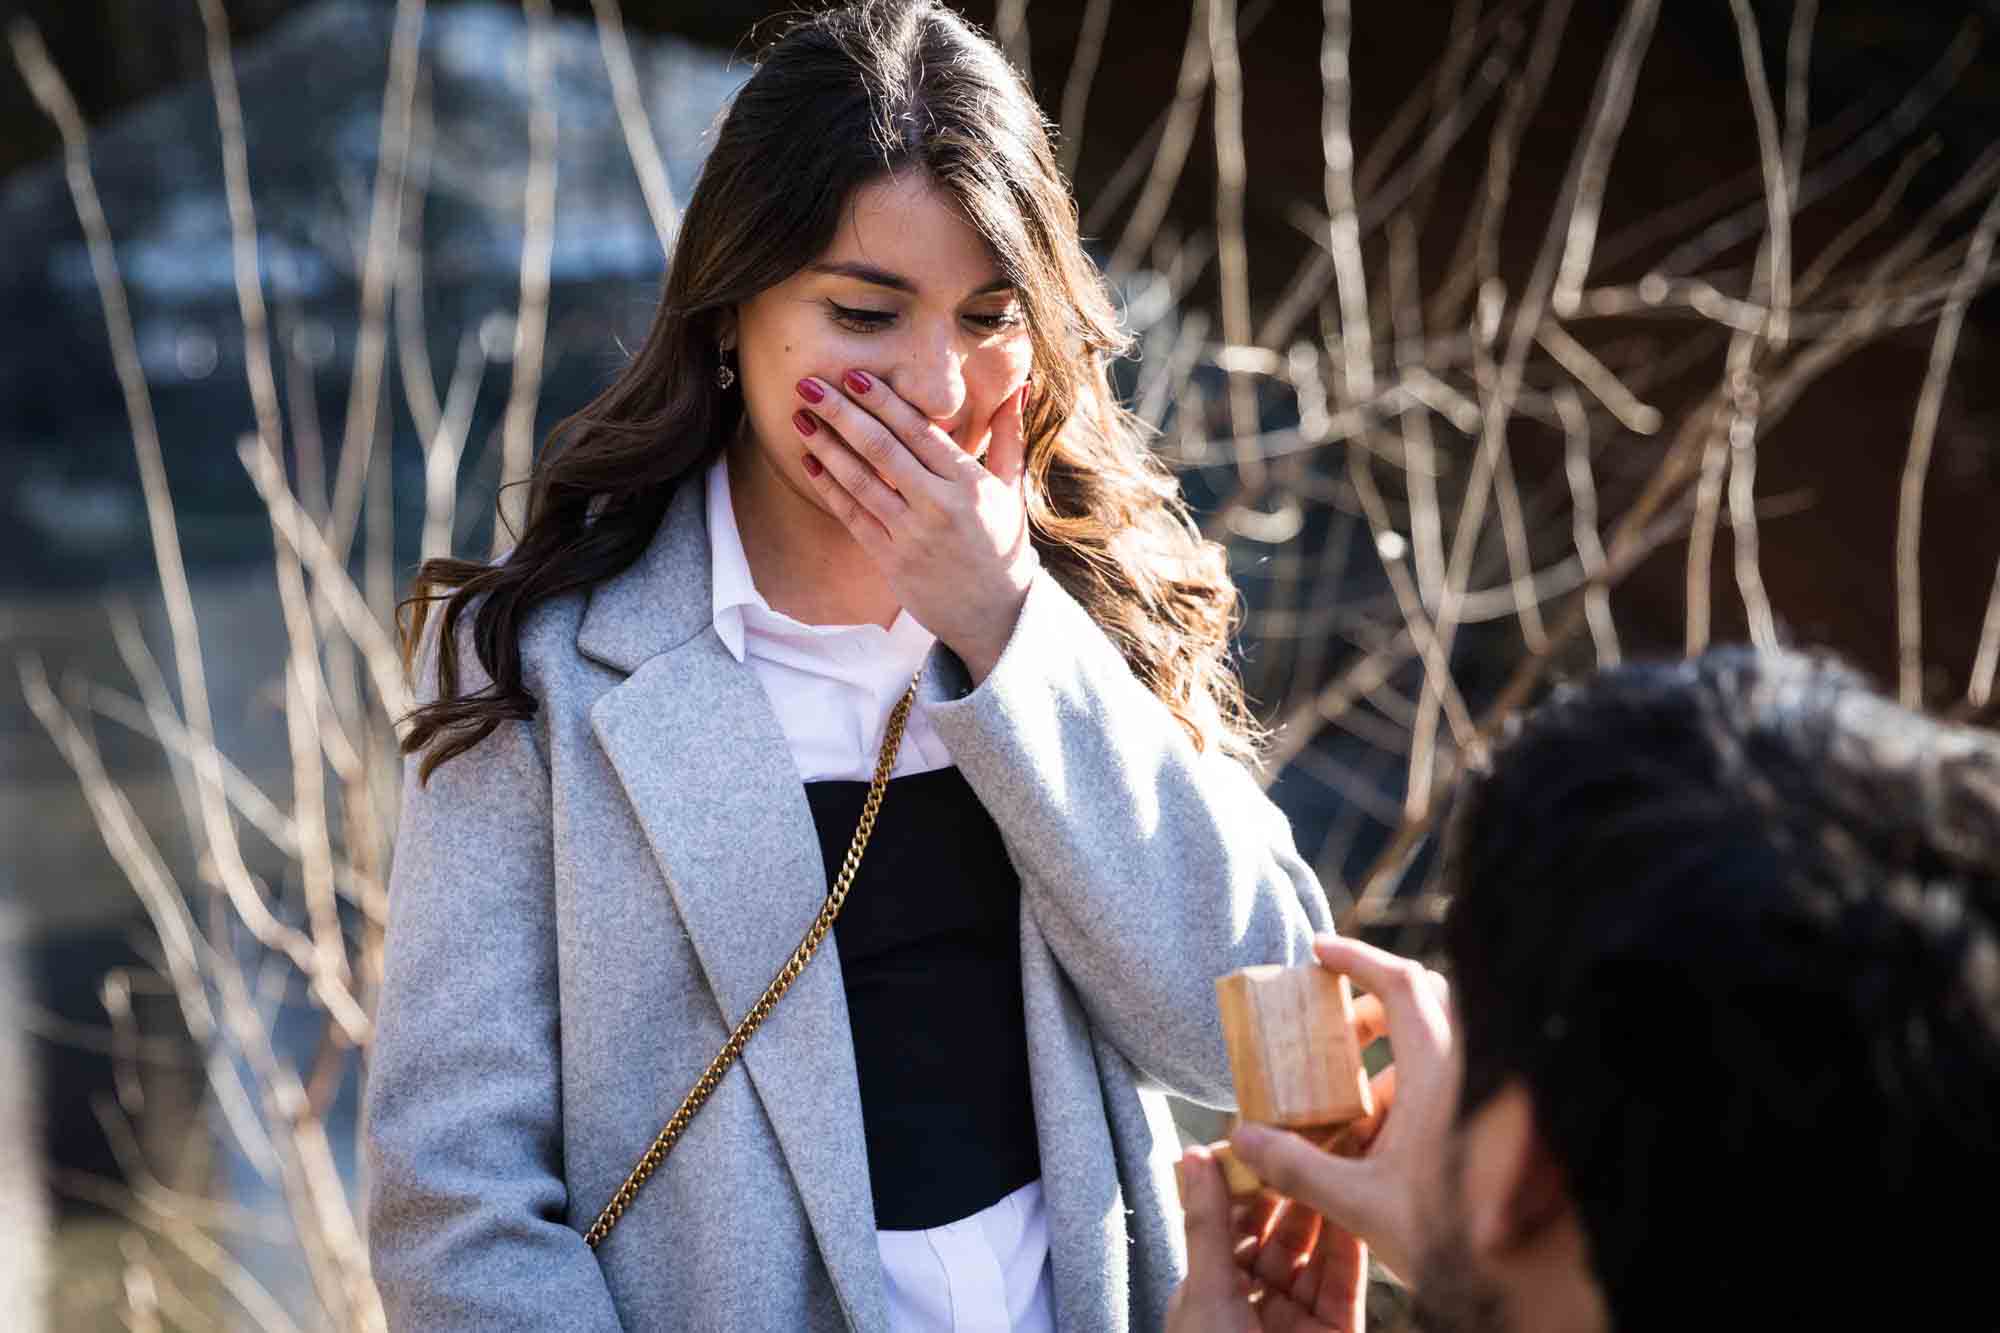 Woman with hand over mouth looking down at man holding engagement ring box during a Gapstow Bridge surprise proposal in Central Park